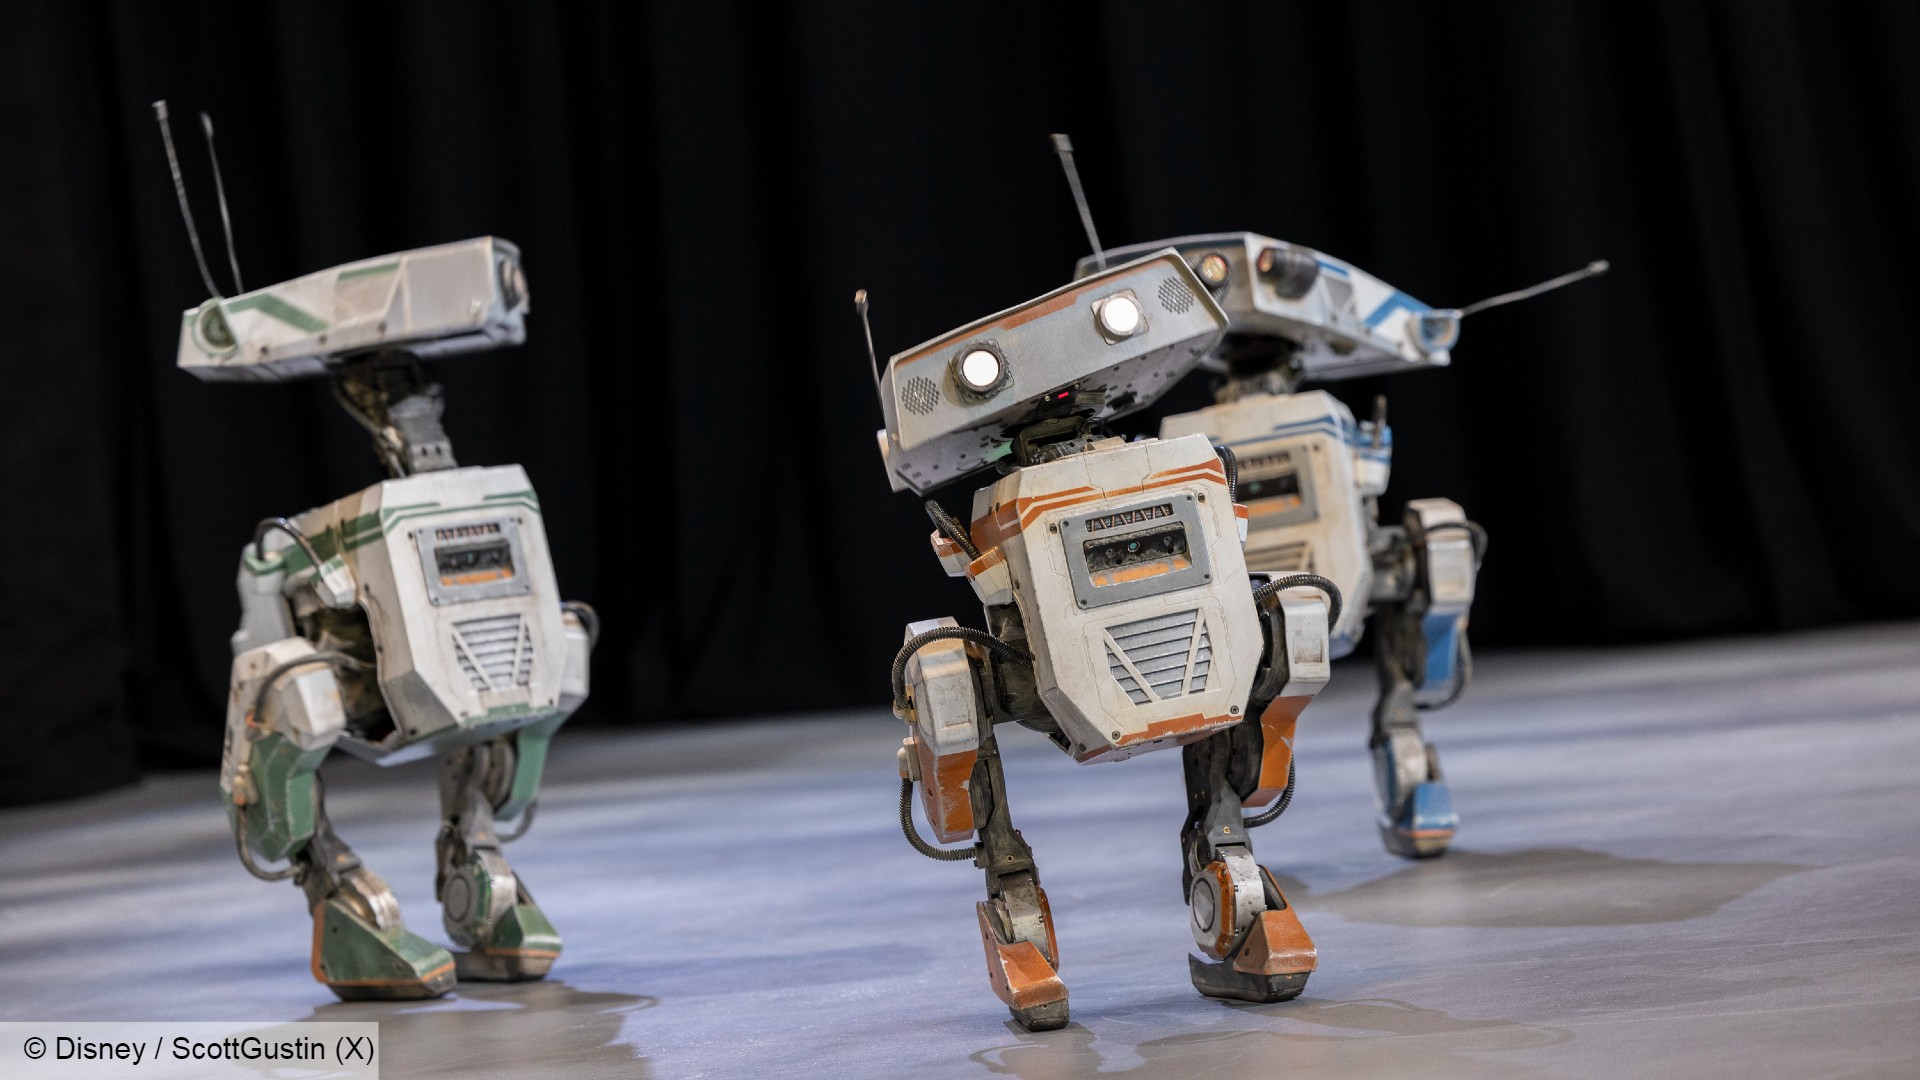 Disney's Steam Deck controlled droids are coming back to Galaxy's Edge